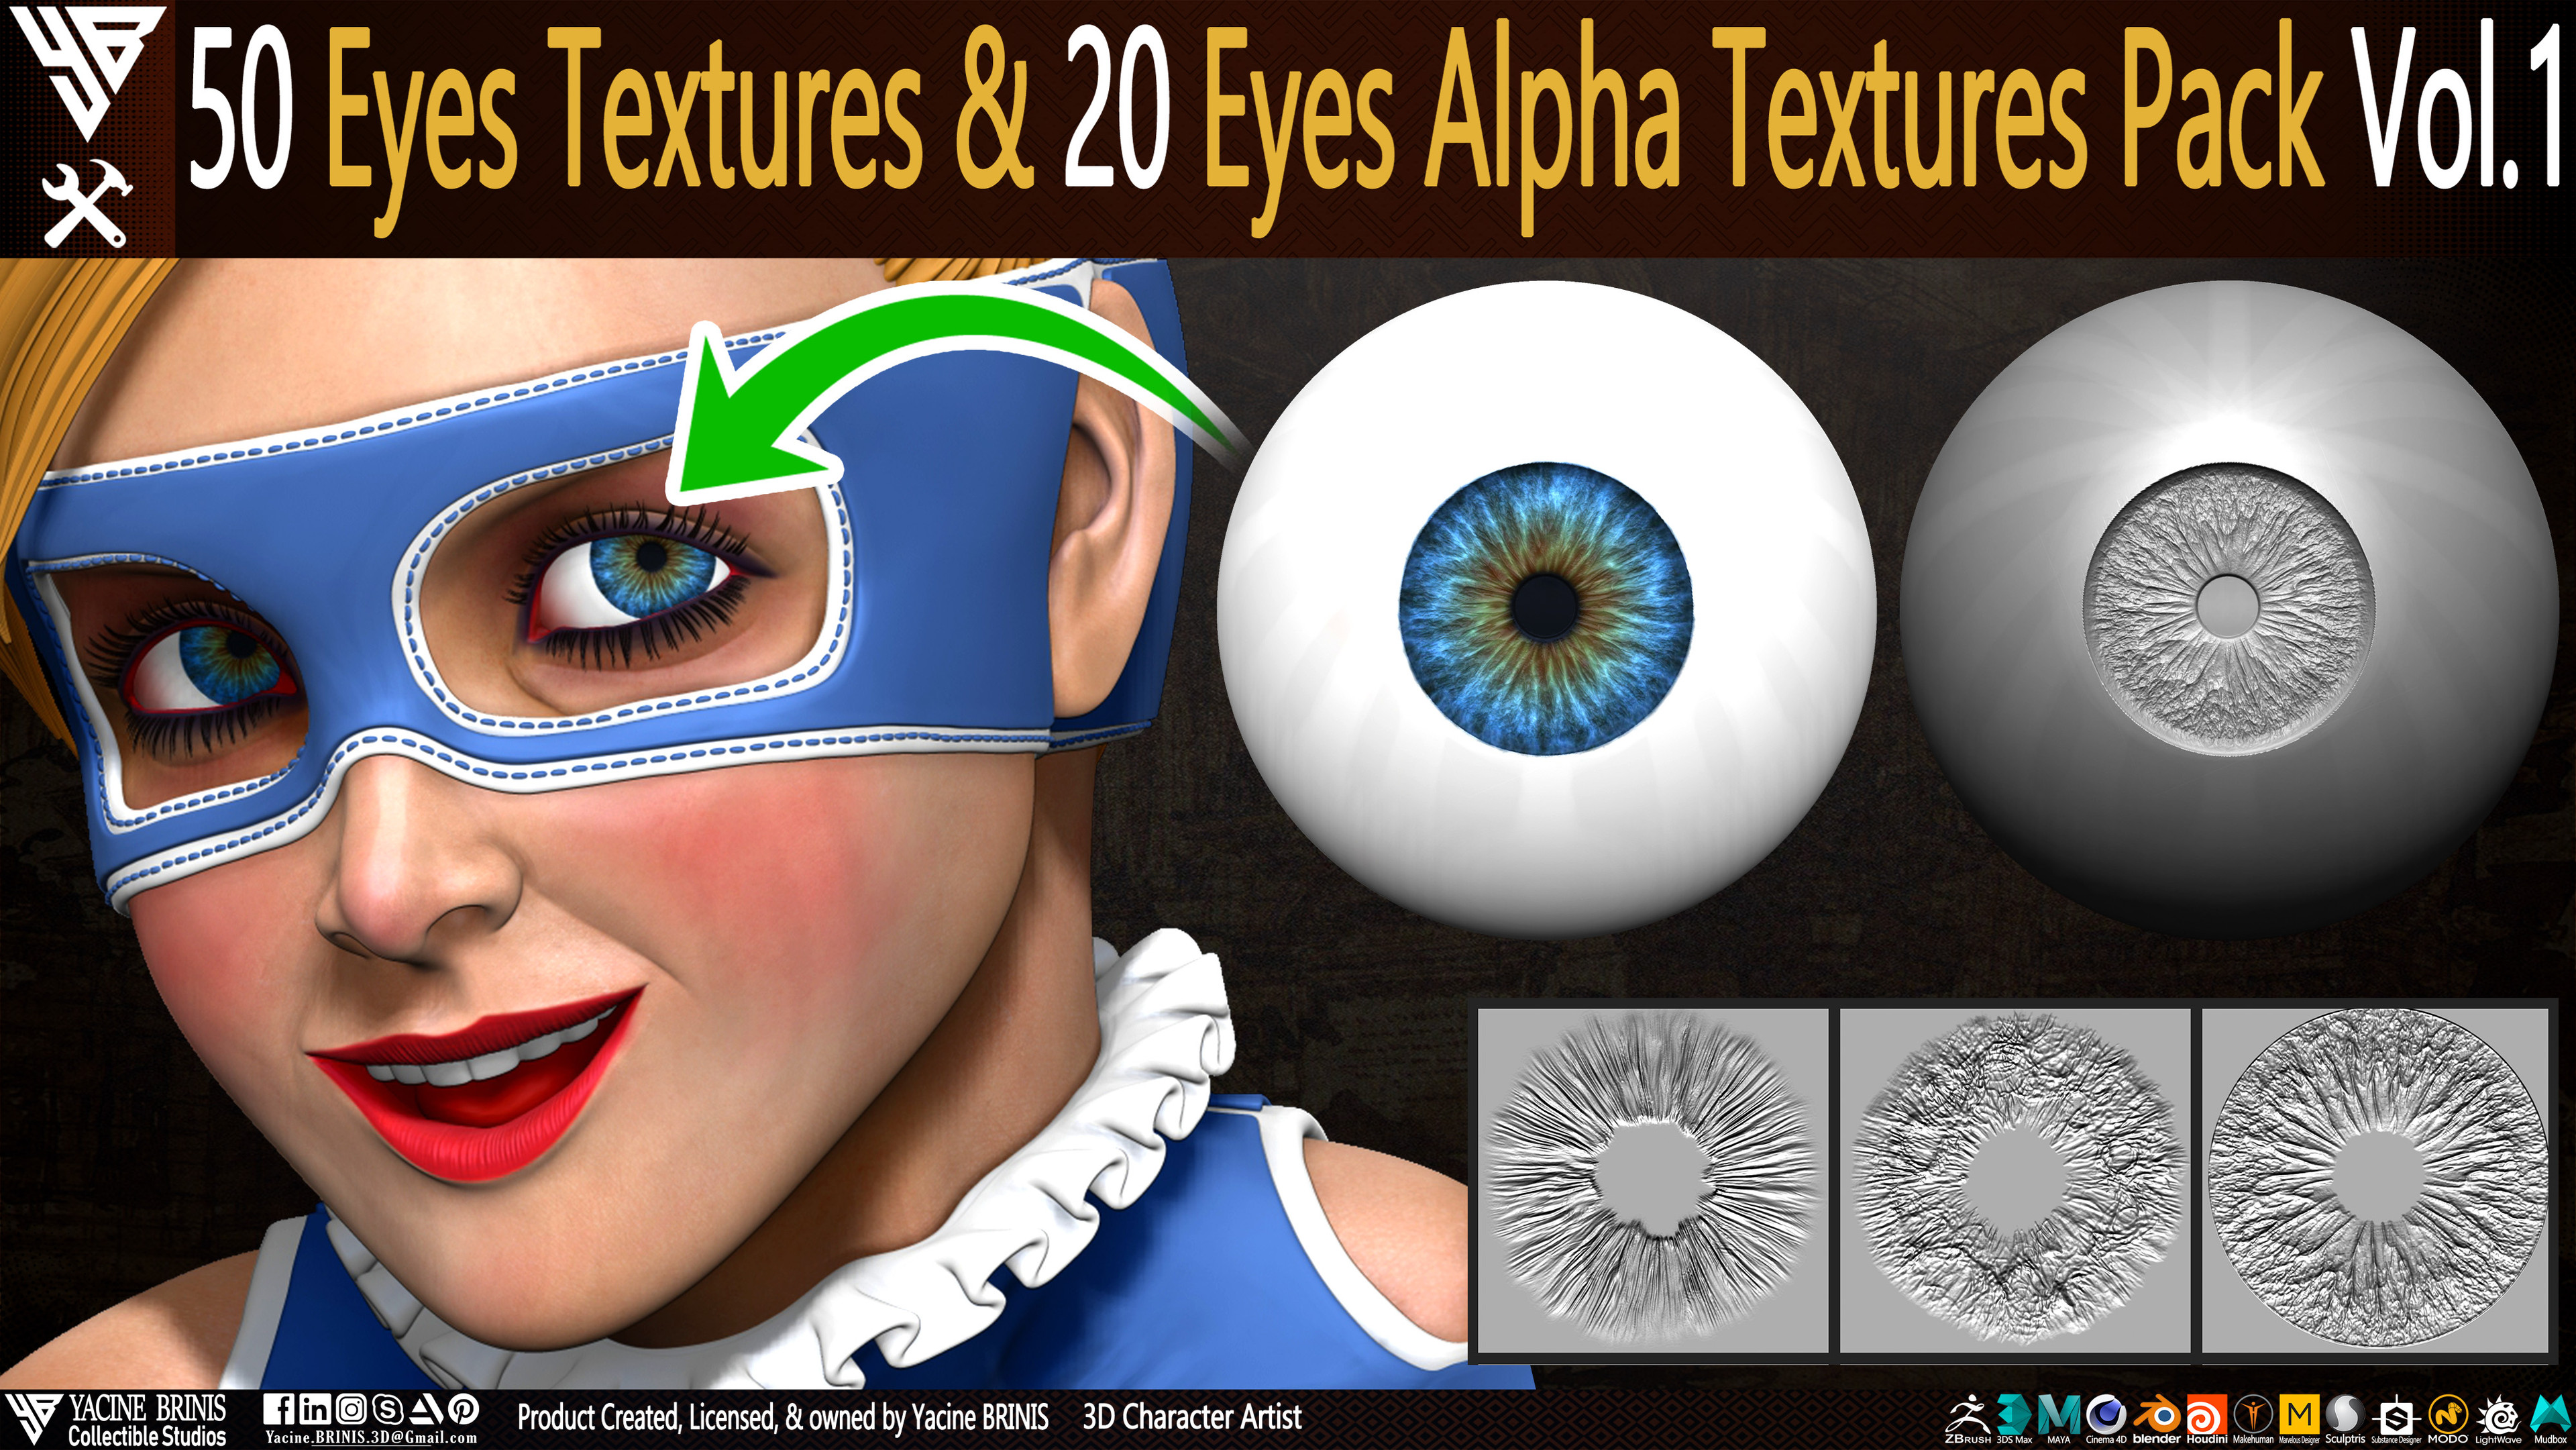 50 Eyes Textures and 20 Eyes Alpha Textures Pack Vol 01 sculpted by Yacine BRINIS Set 09